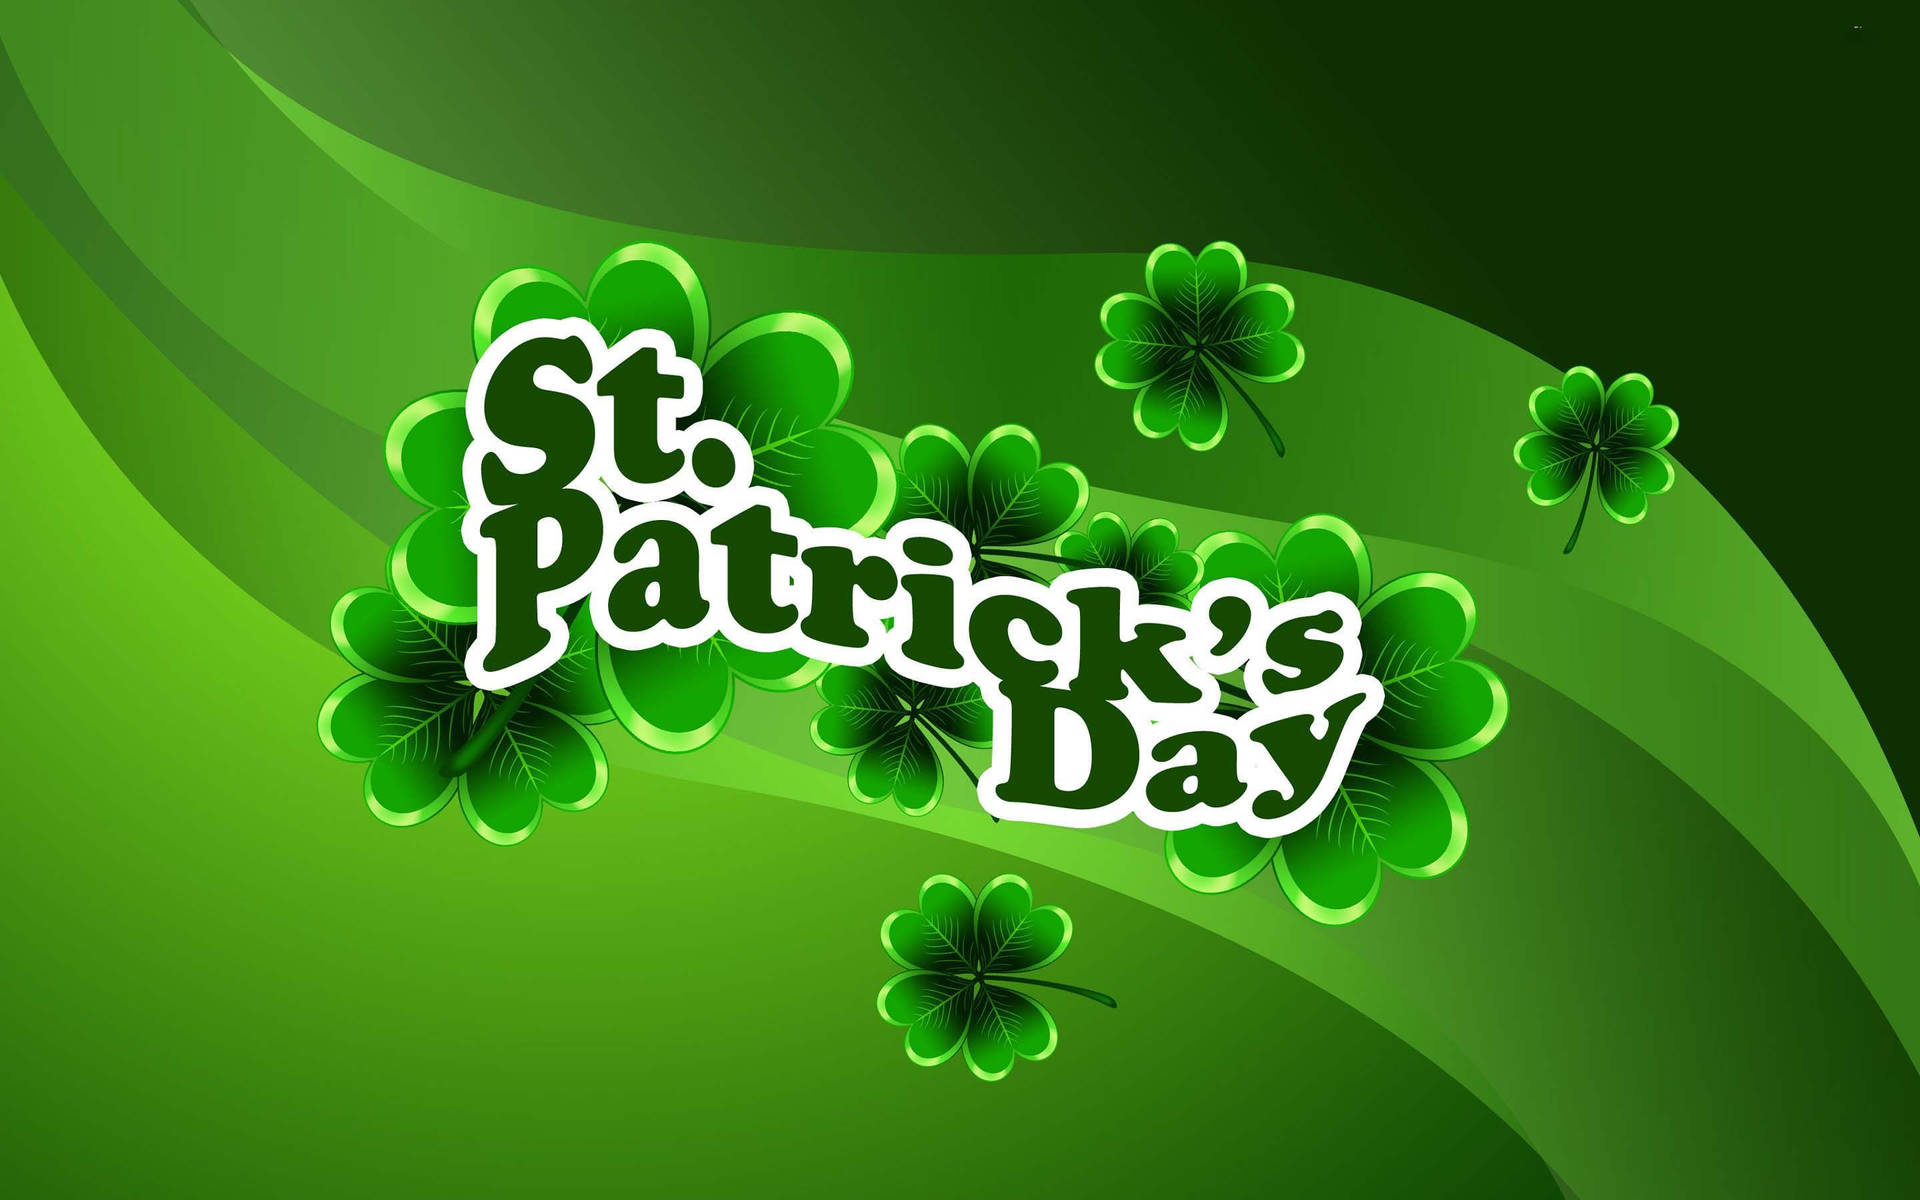 Saint Patrick’s Day Green Poster Background